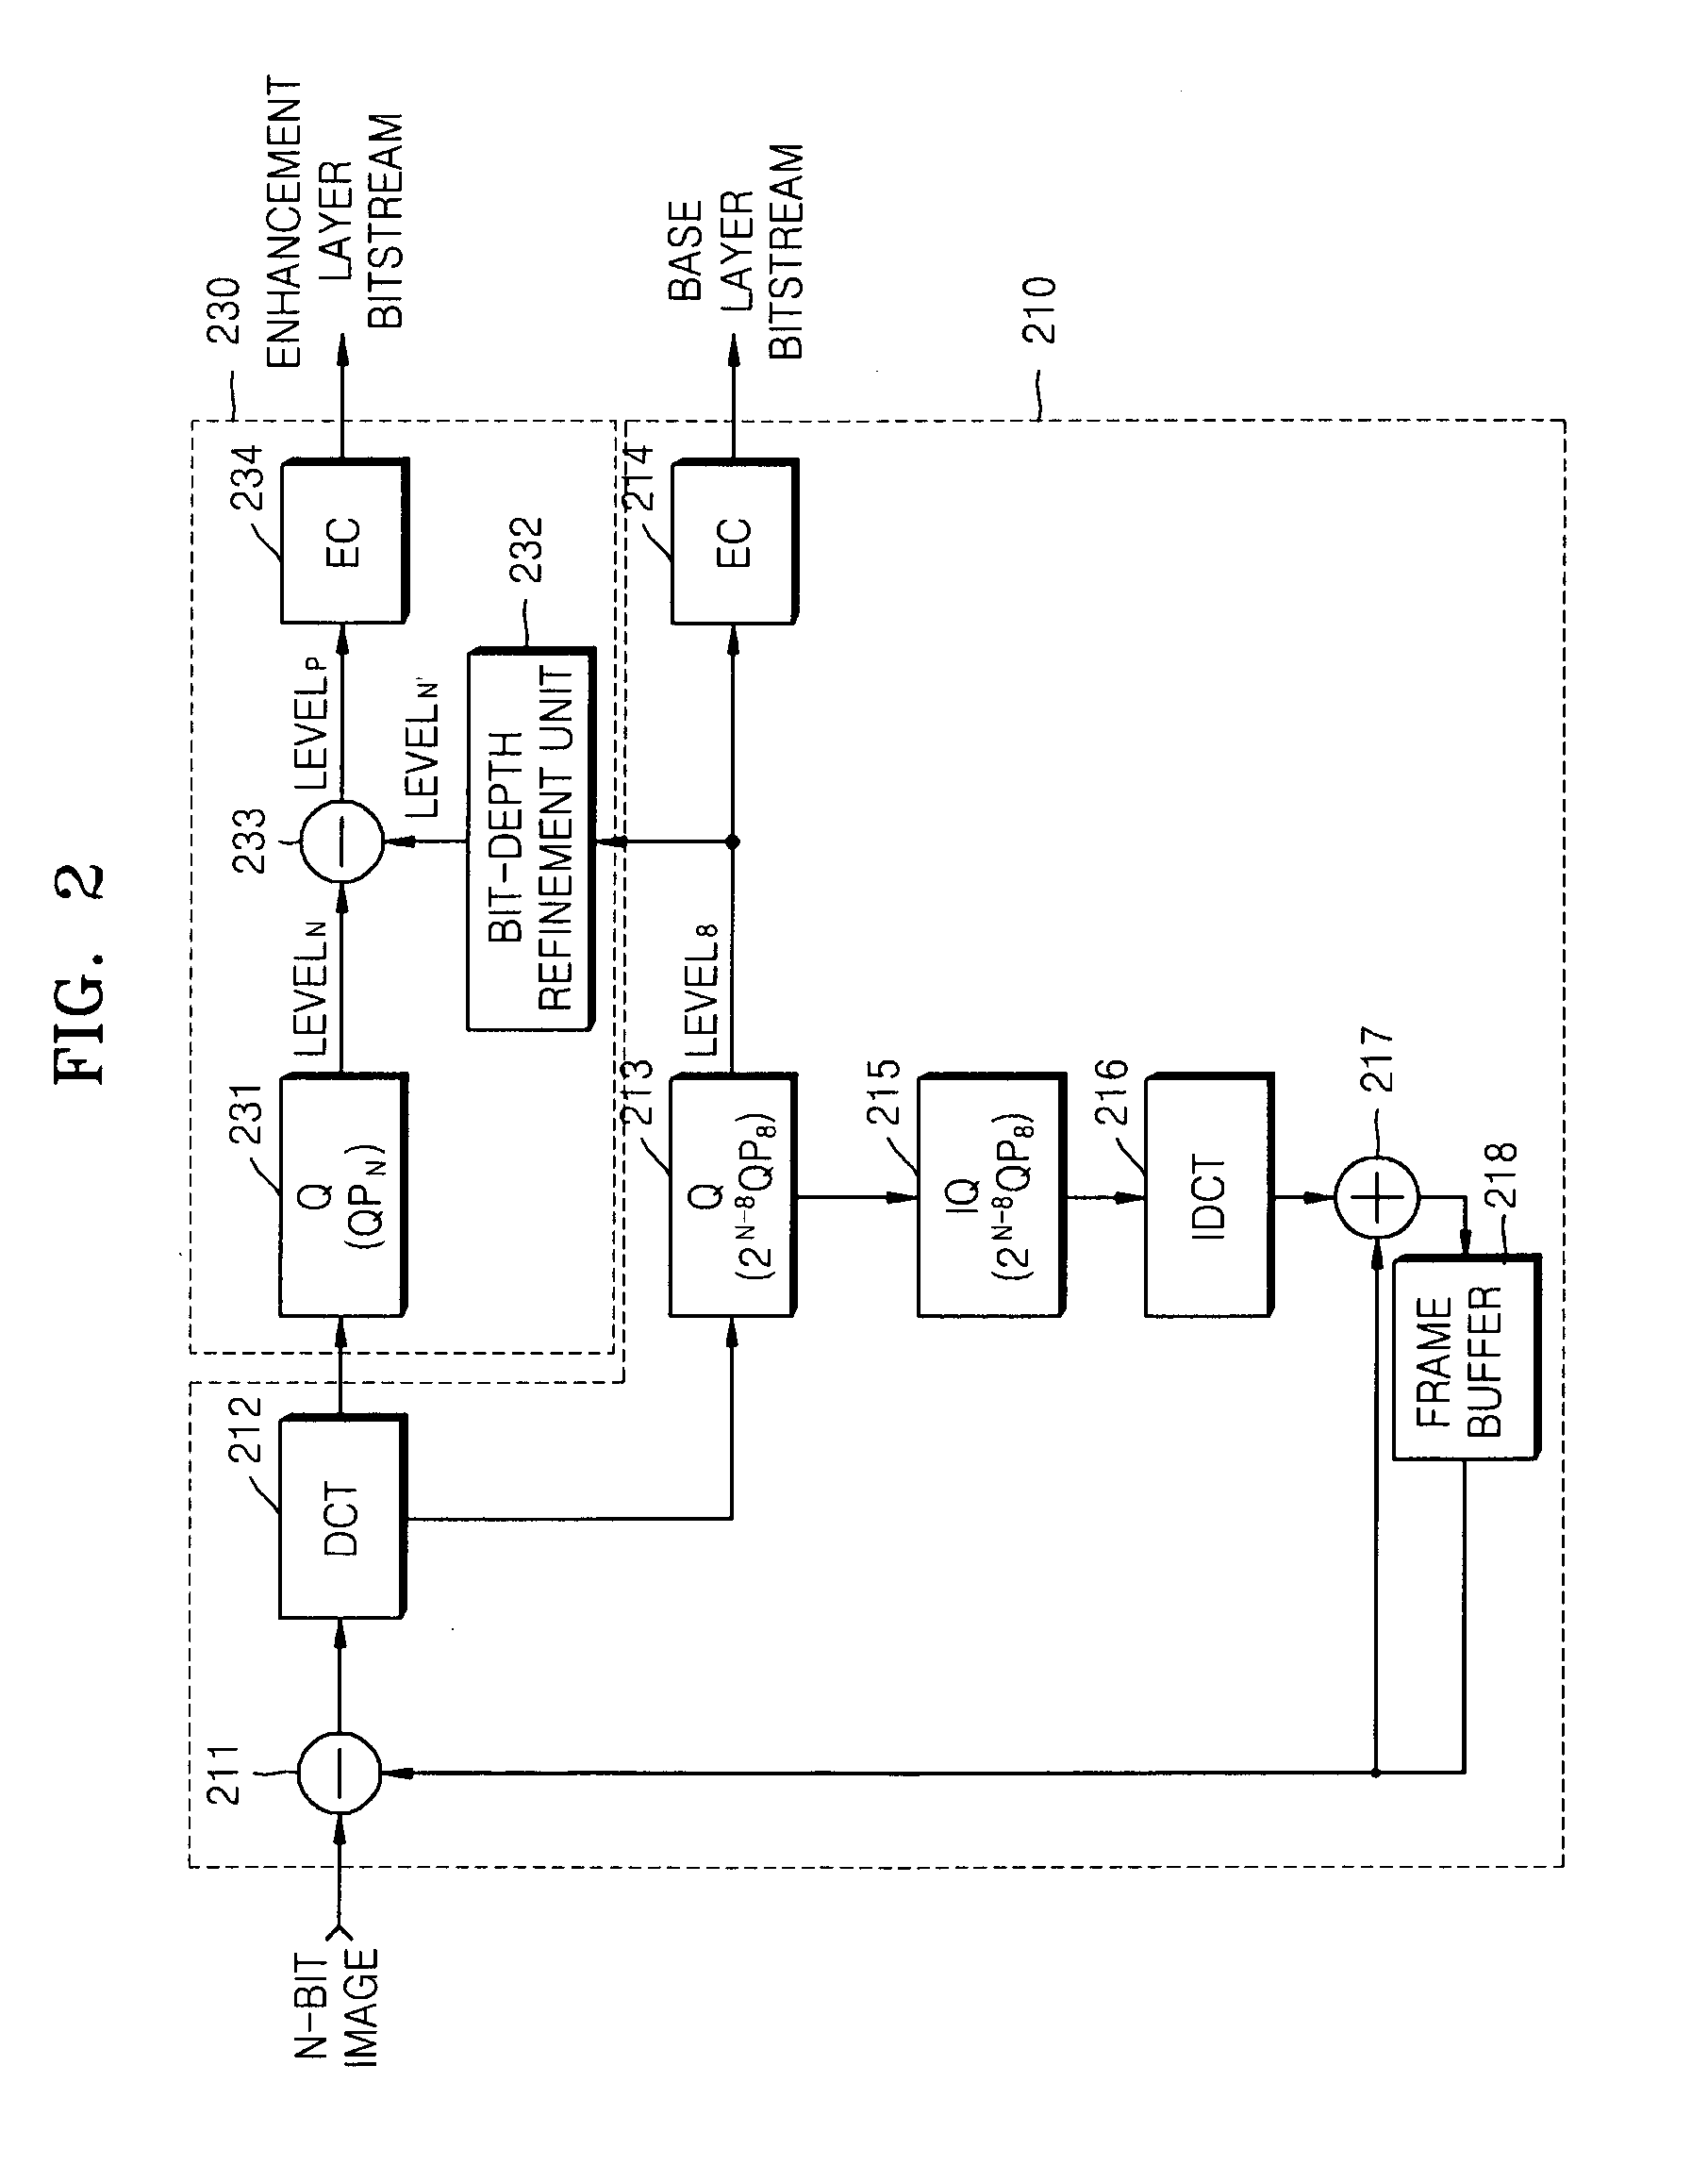 Method, medium, and apparatus for encoding and/or decoding video